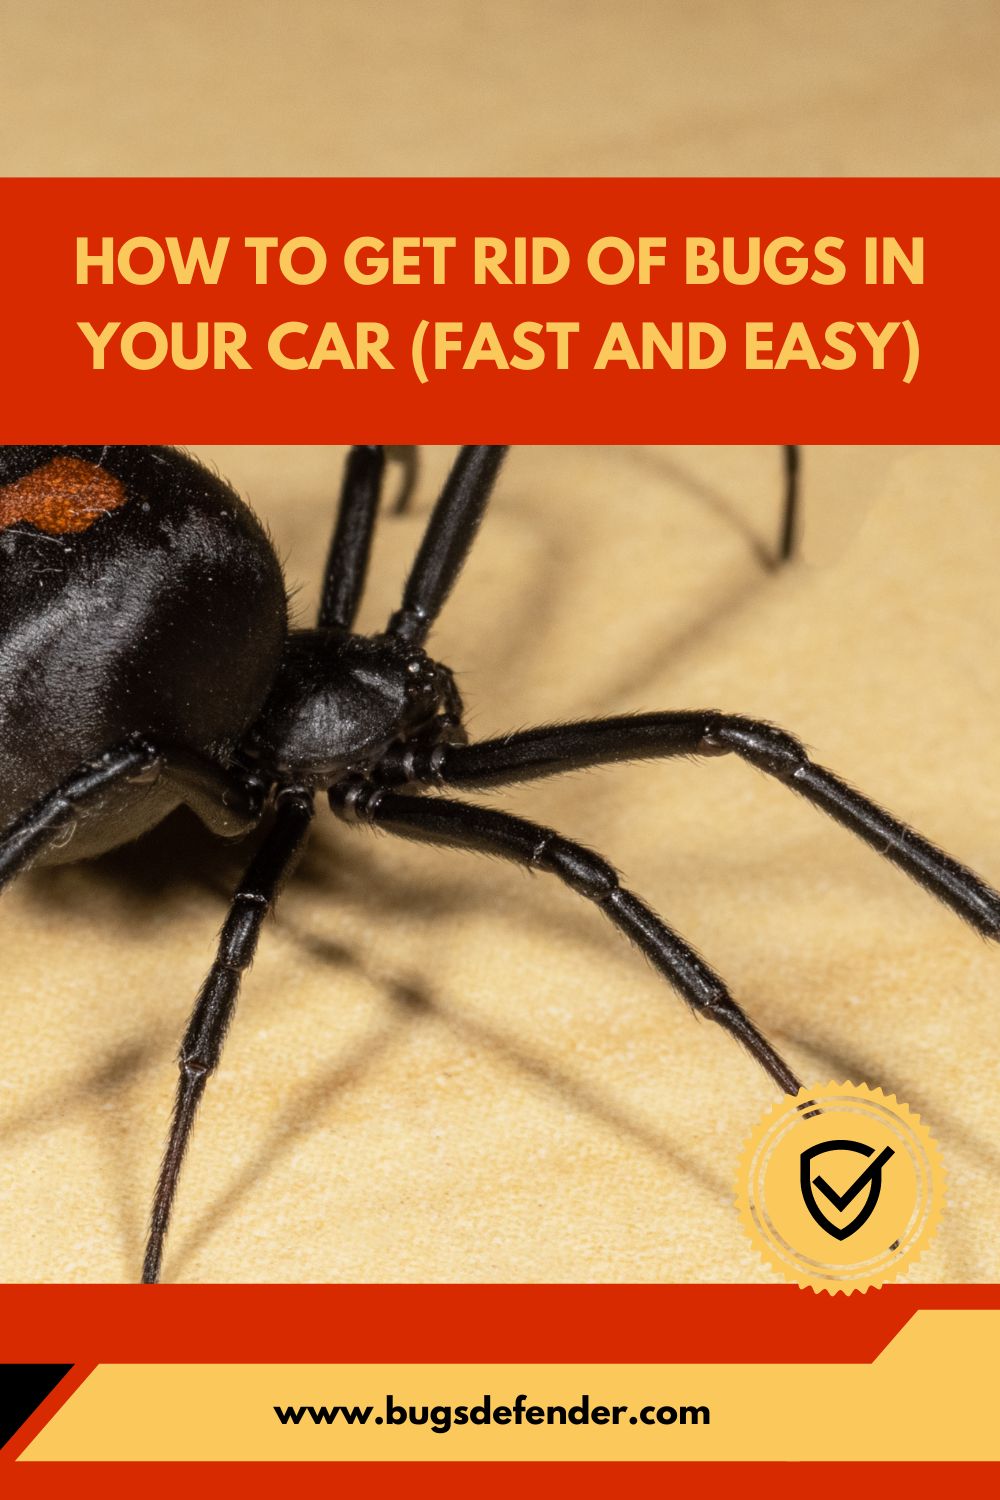 How To Get Rid Of Bugs In Your Car pin1